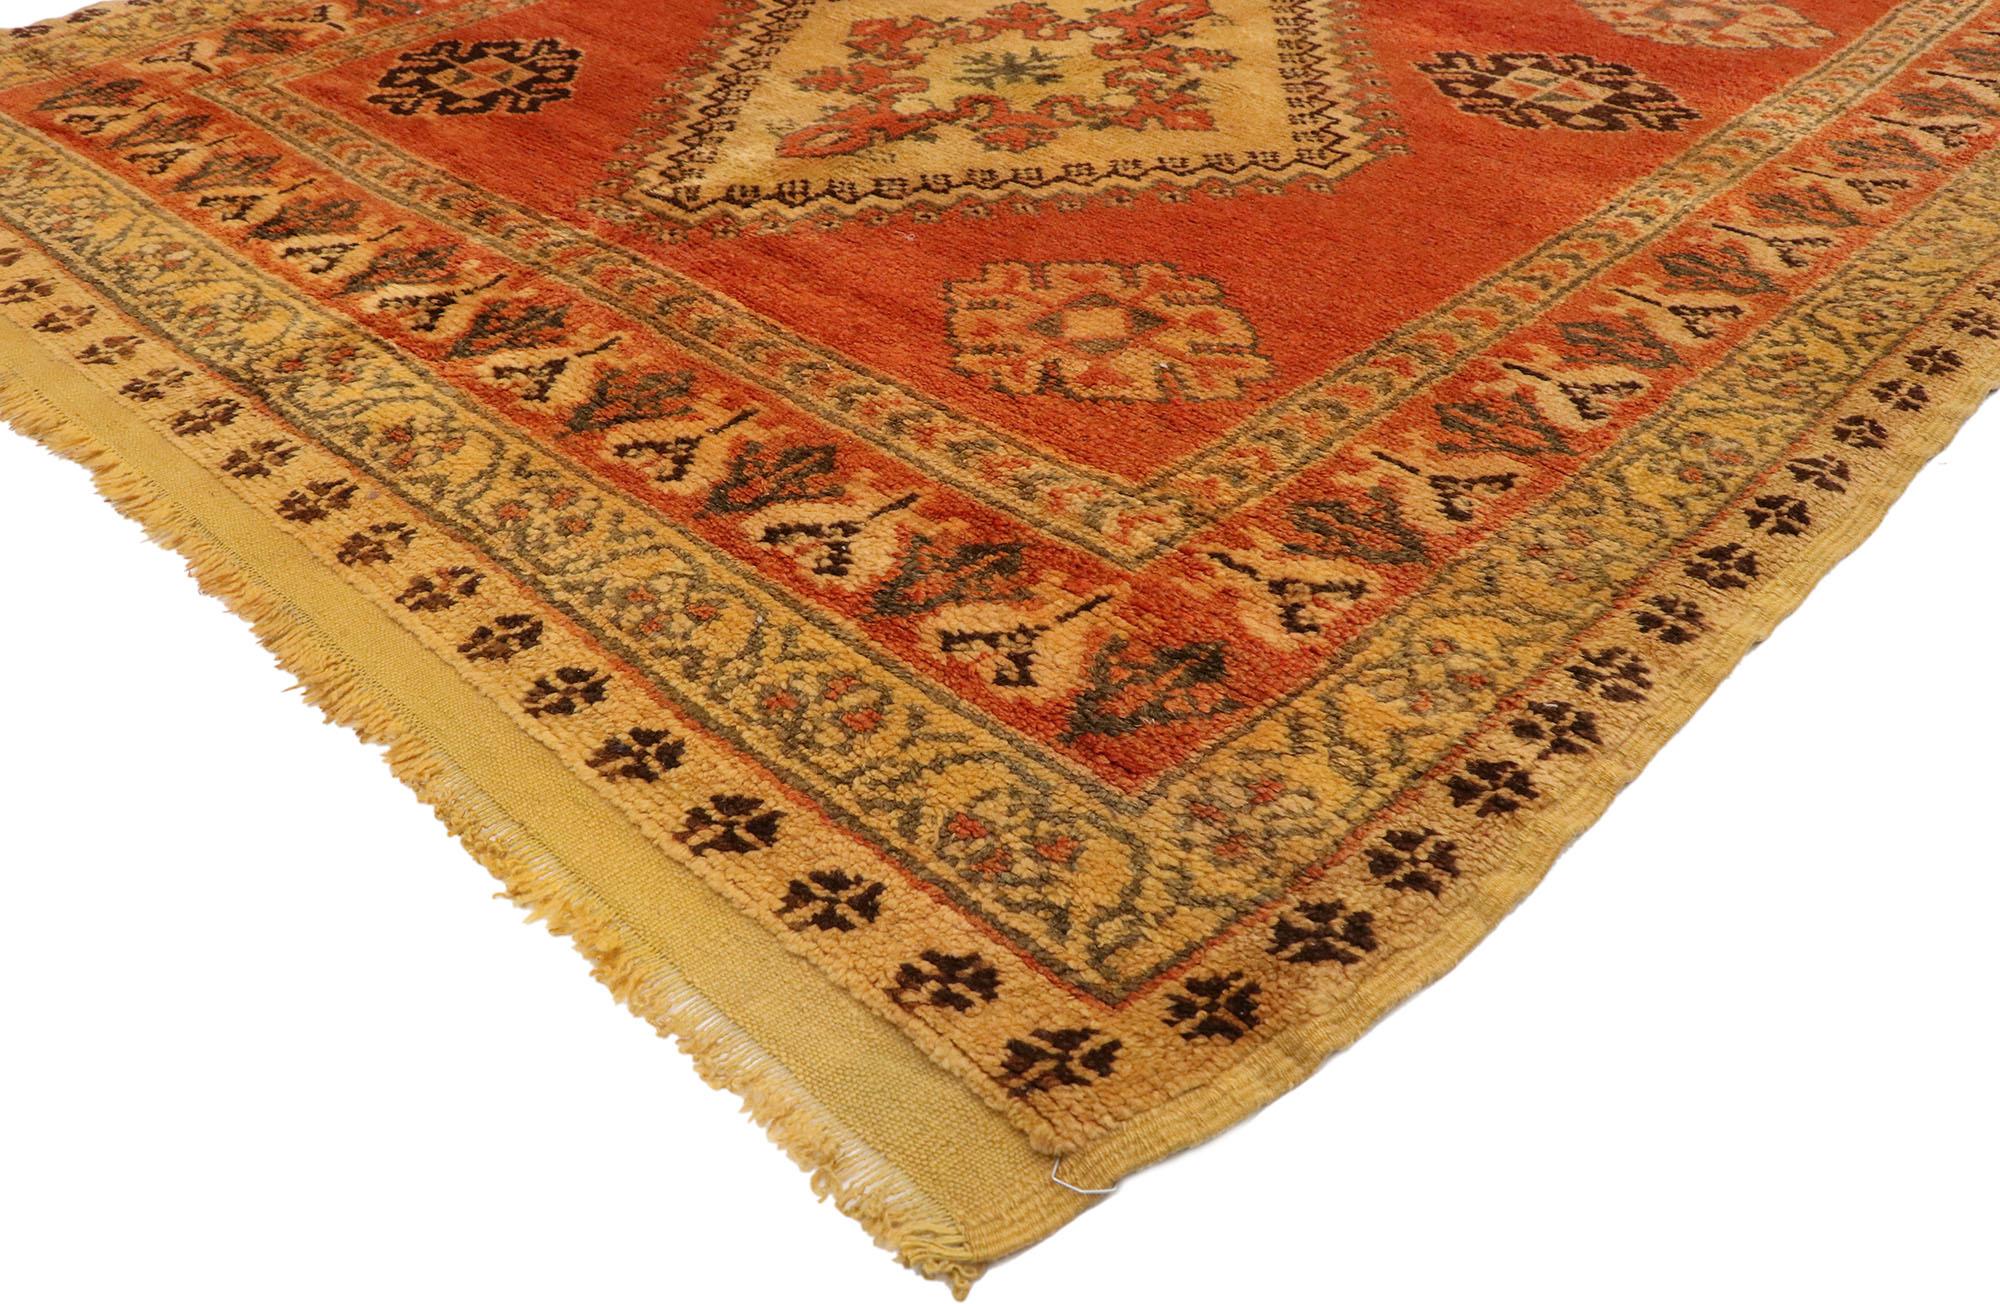 20211 Vintage Berber Moroccan Rug, 05'03 x 10'01. 
Nomadic charm meets Pacific Northwest style in this hand knotted wool vintage Berber Moroccan rug. The distinctive tribal design and spicy earth-tone color palette woven into this piece work